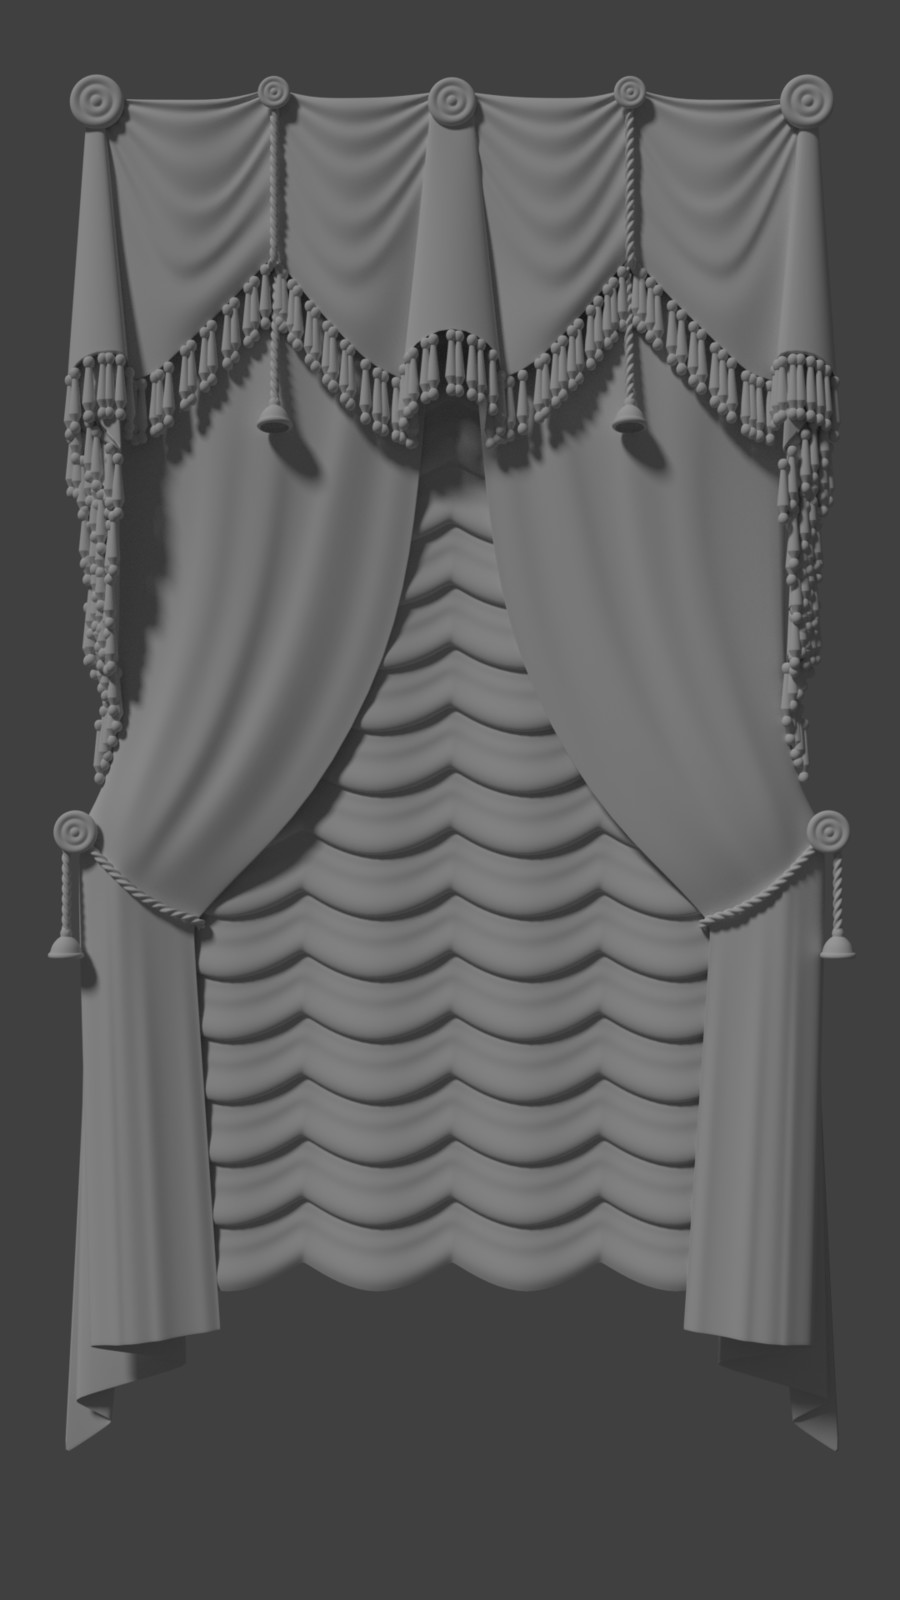 These curtains were the catalyst that took me from making a Christmas tree scene to a full on living room. They were kind of a doodle I ended up needing a scene for since I liked them so much.